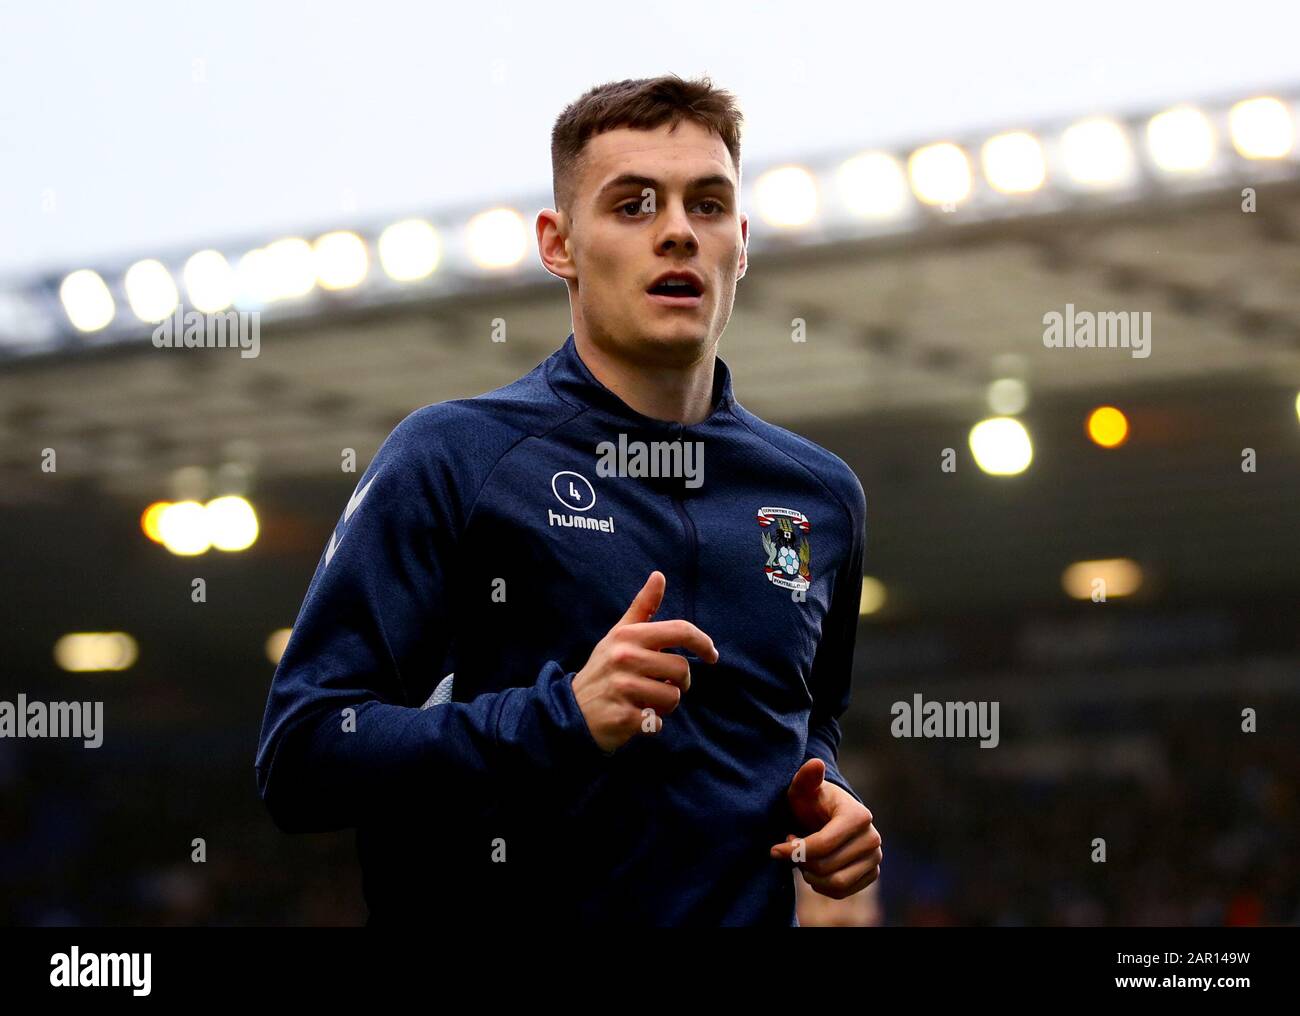 Coventry City's Michael Rose ahead of the FA Cup fourth round match at St Andrew's Trillion Trophy Stadium, Birmingham. Stock Photo